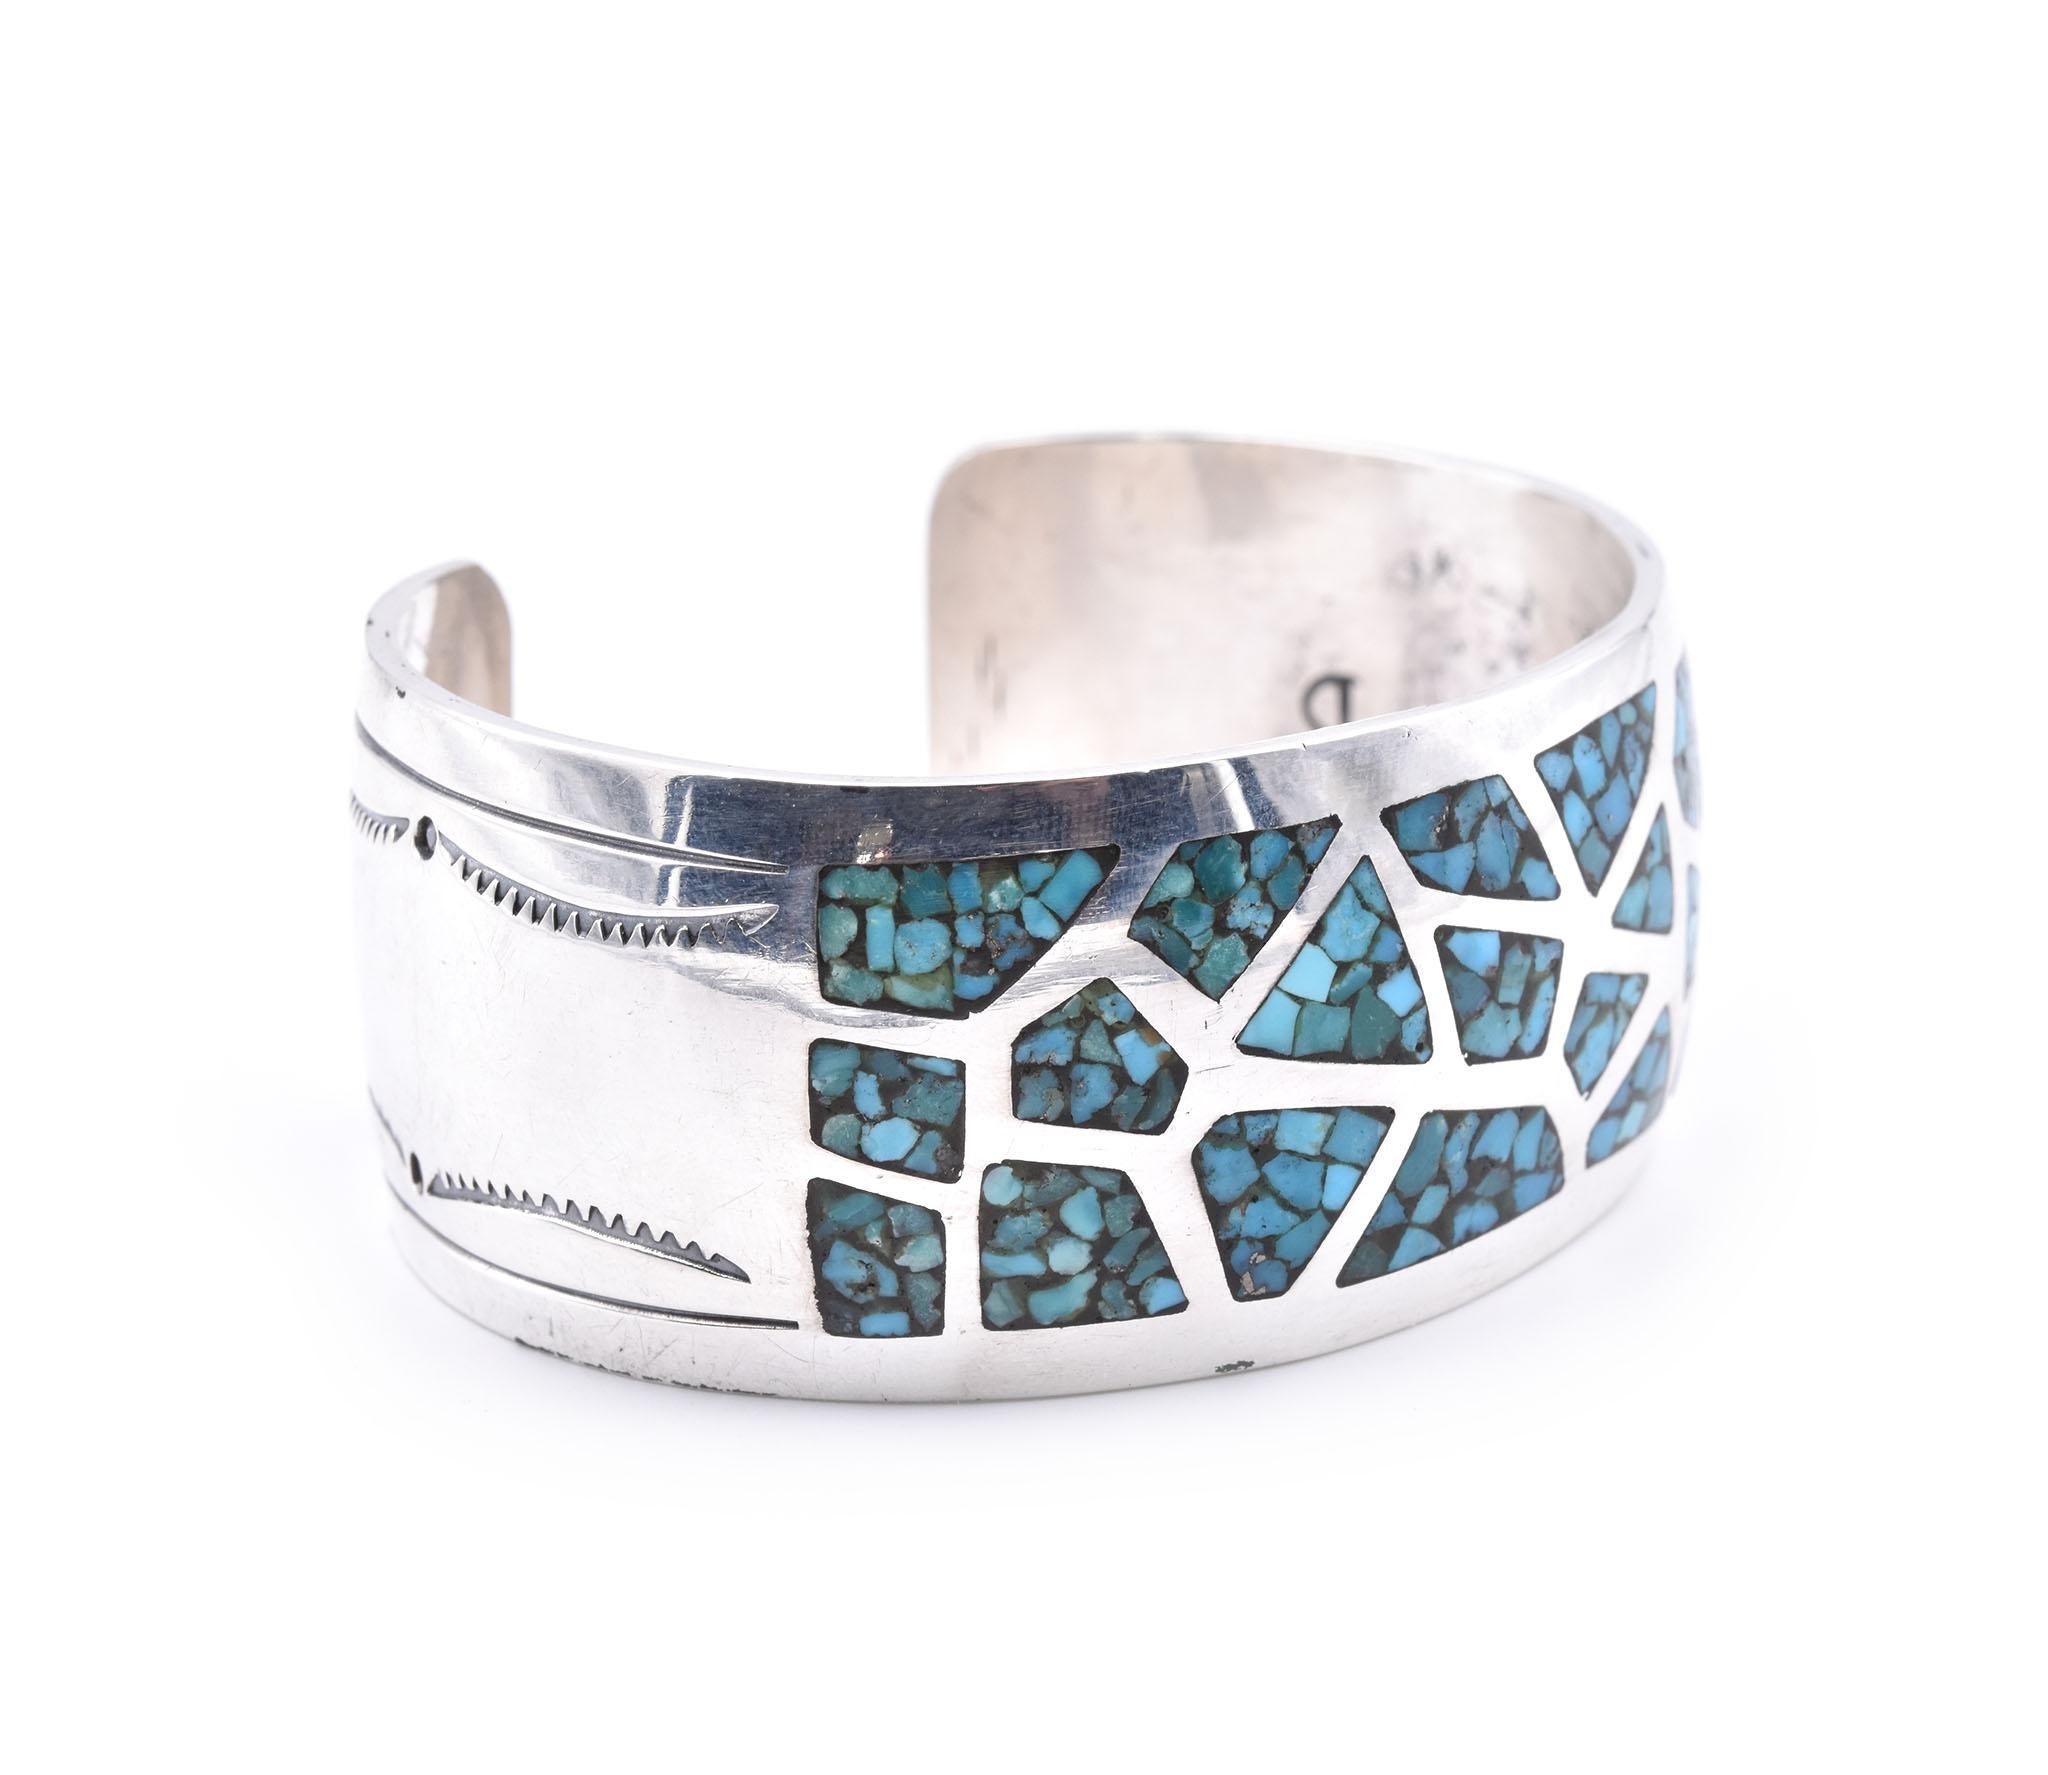 Designer: custom
Material: sterling silver
Dimensions: cuff measures 27.3mm wide
Weight: 57.32 grams
